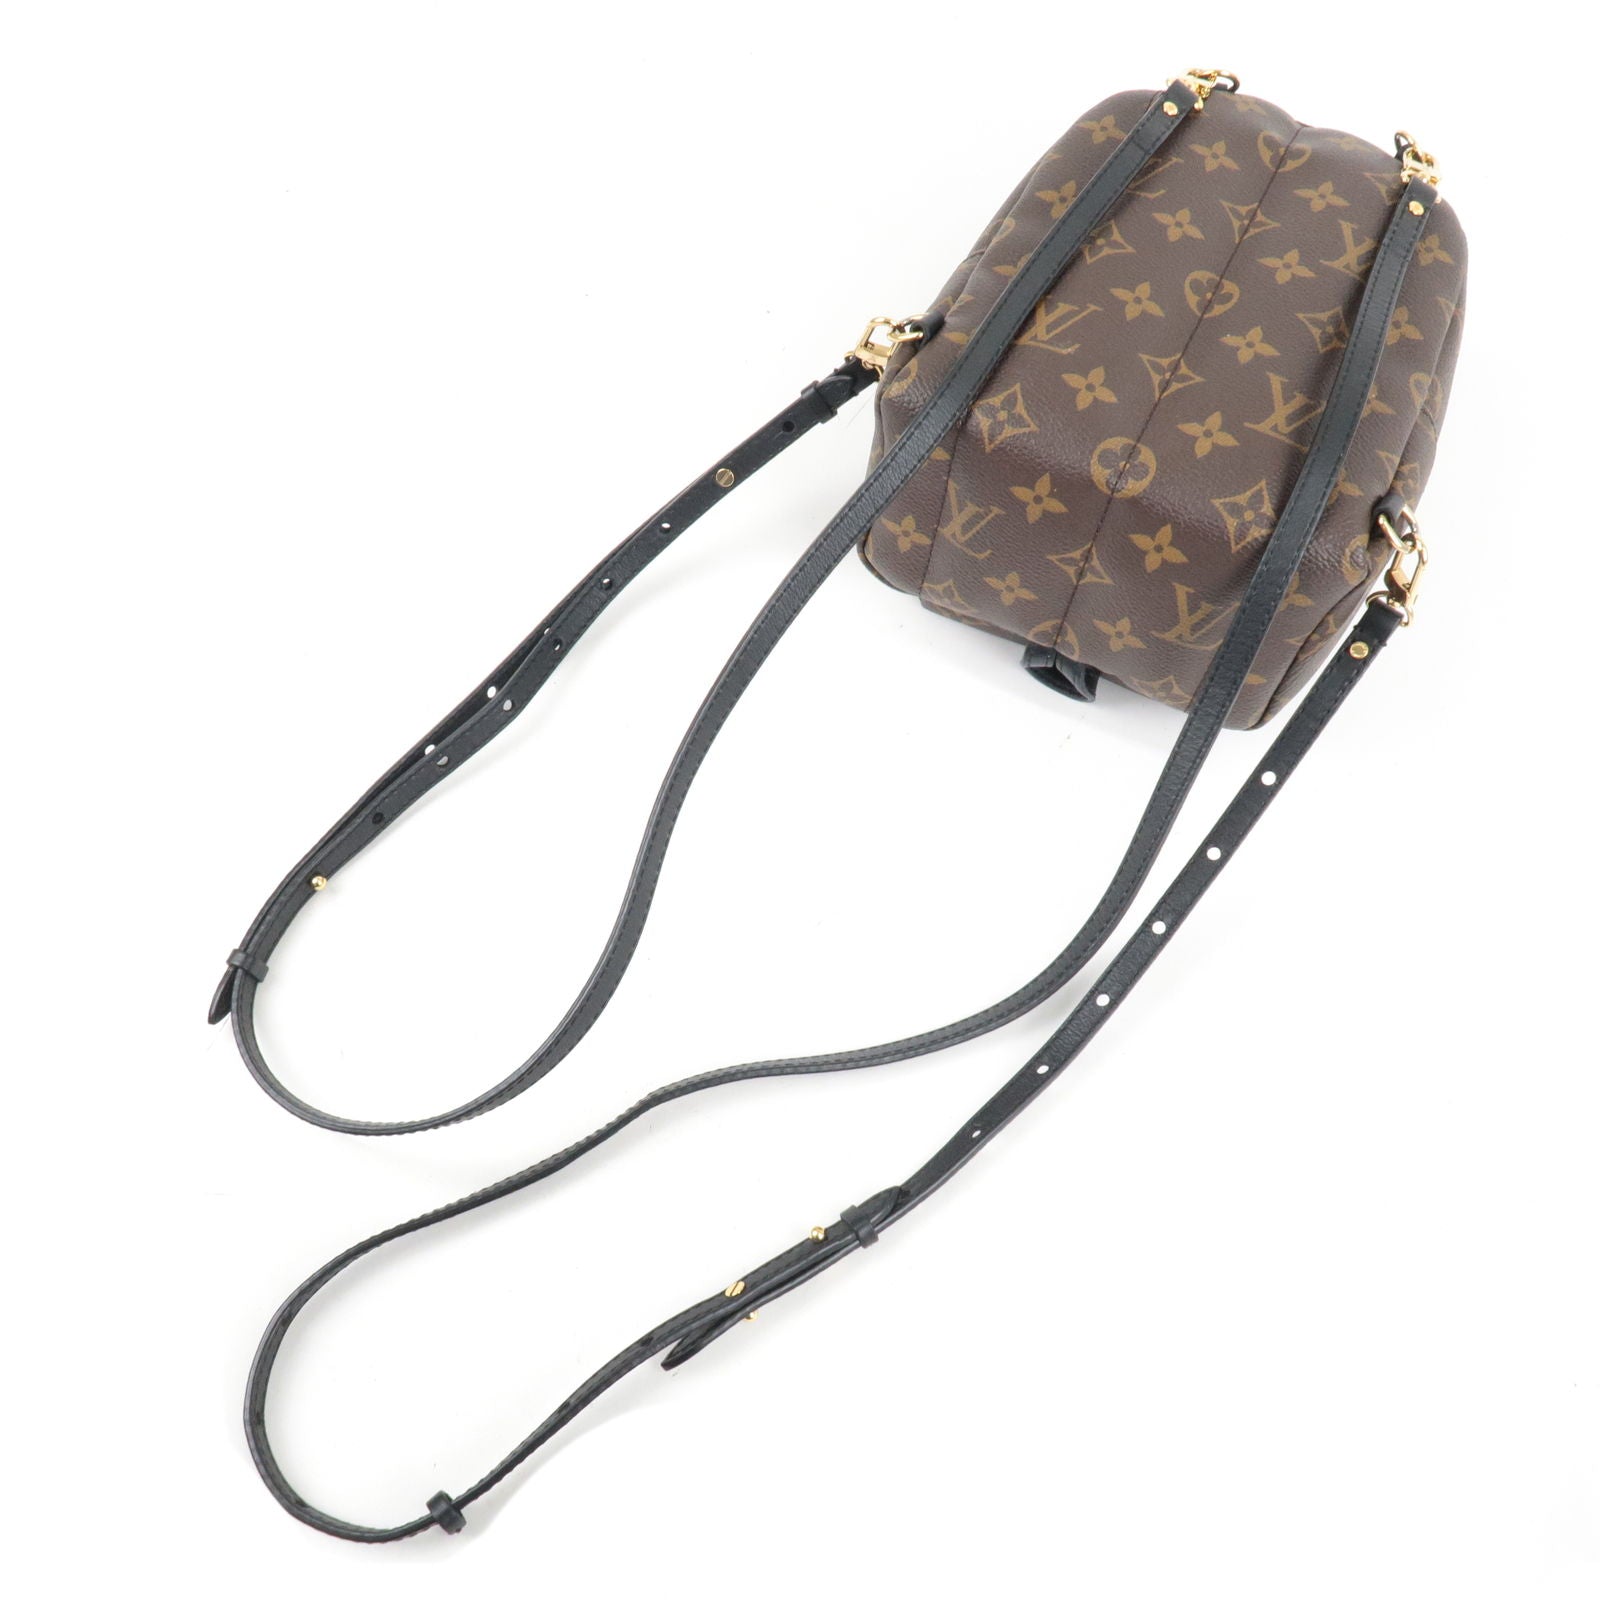 Buy Louis Vuitton Palm Springs Mini Backpack M44873 at